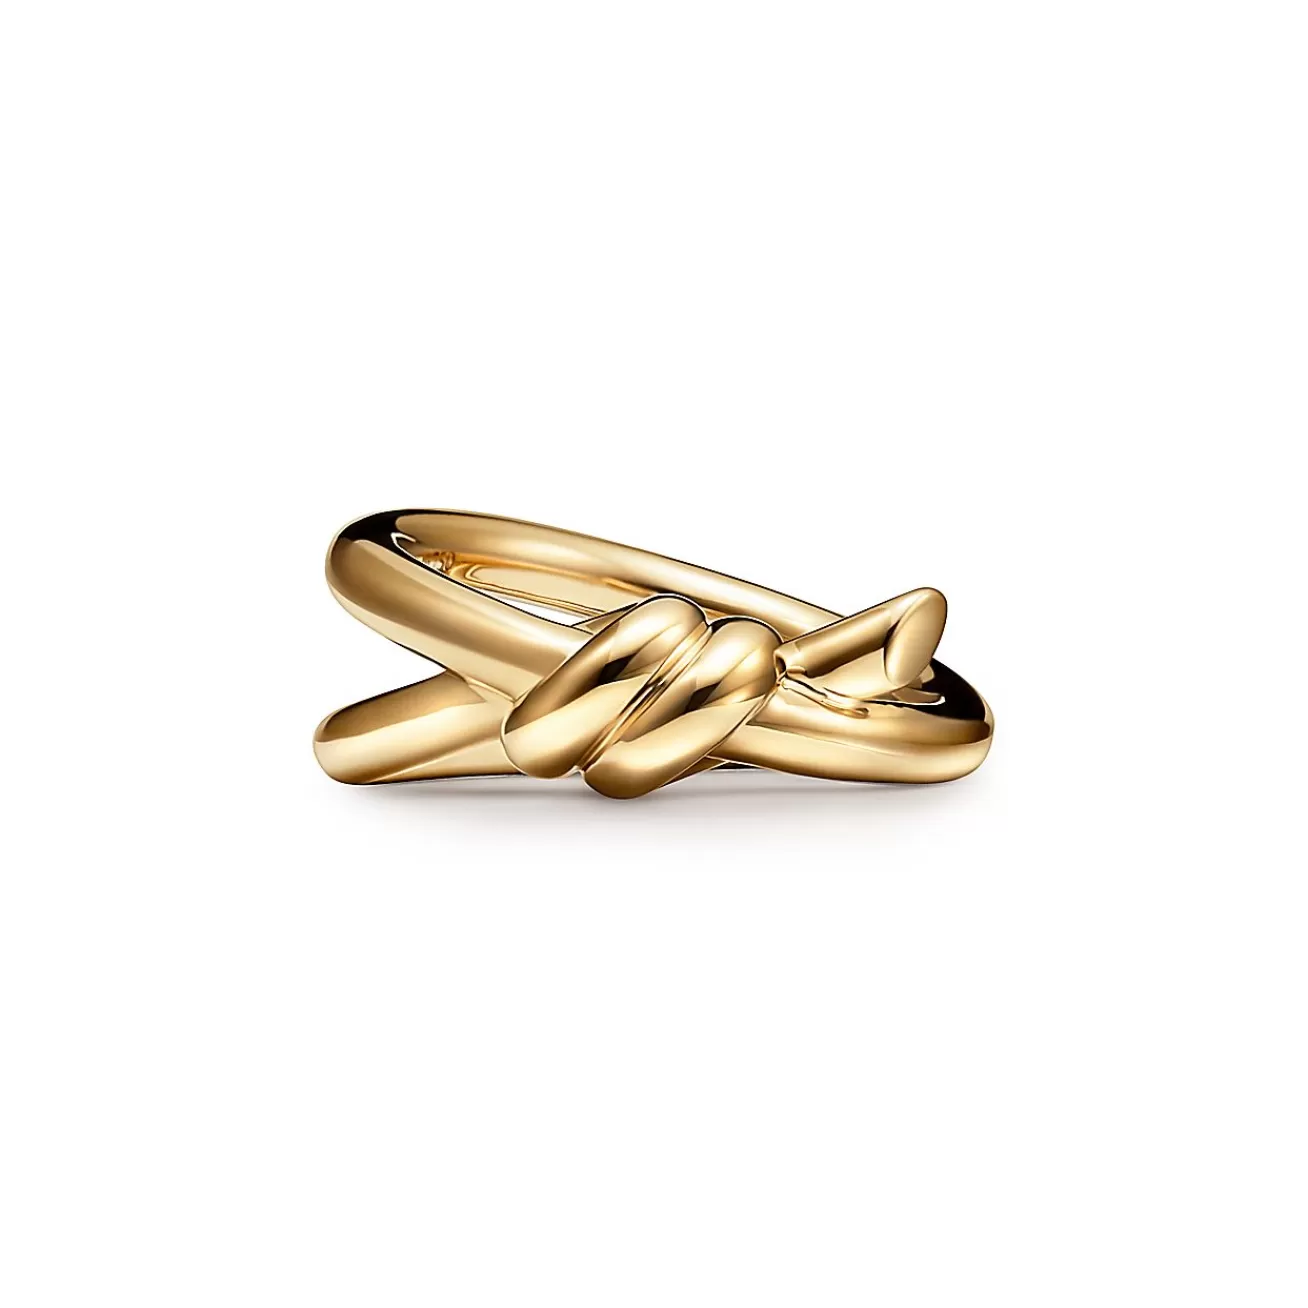 Tiffany & Co. Tiffany Knot Double Row Ring in Yellow Gold | ^ Rings | Gold Jewelry